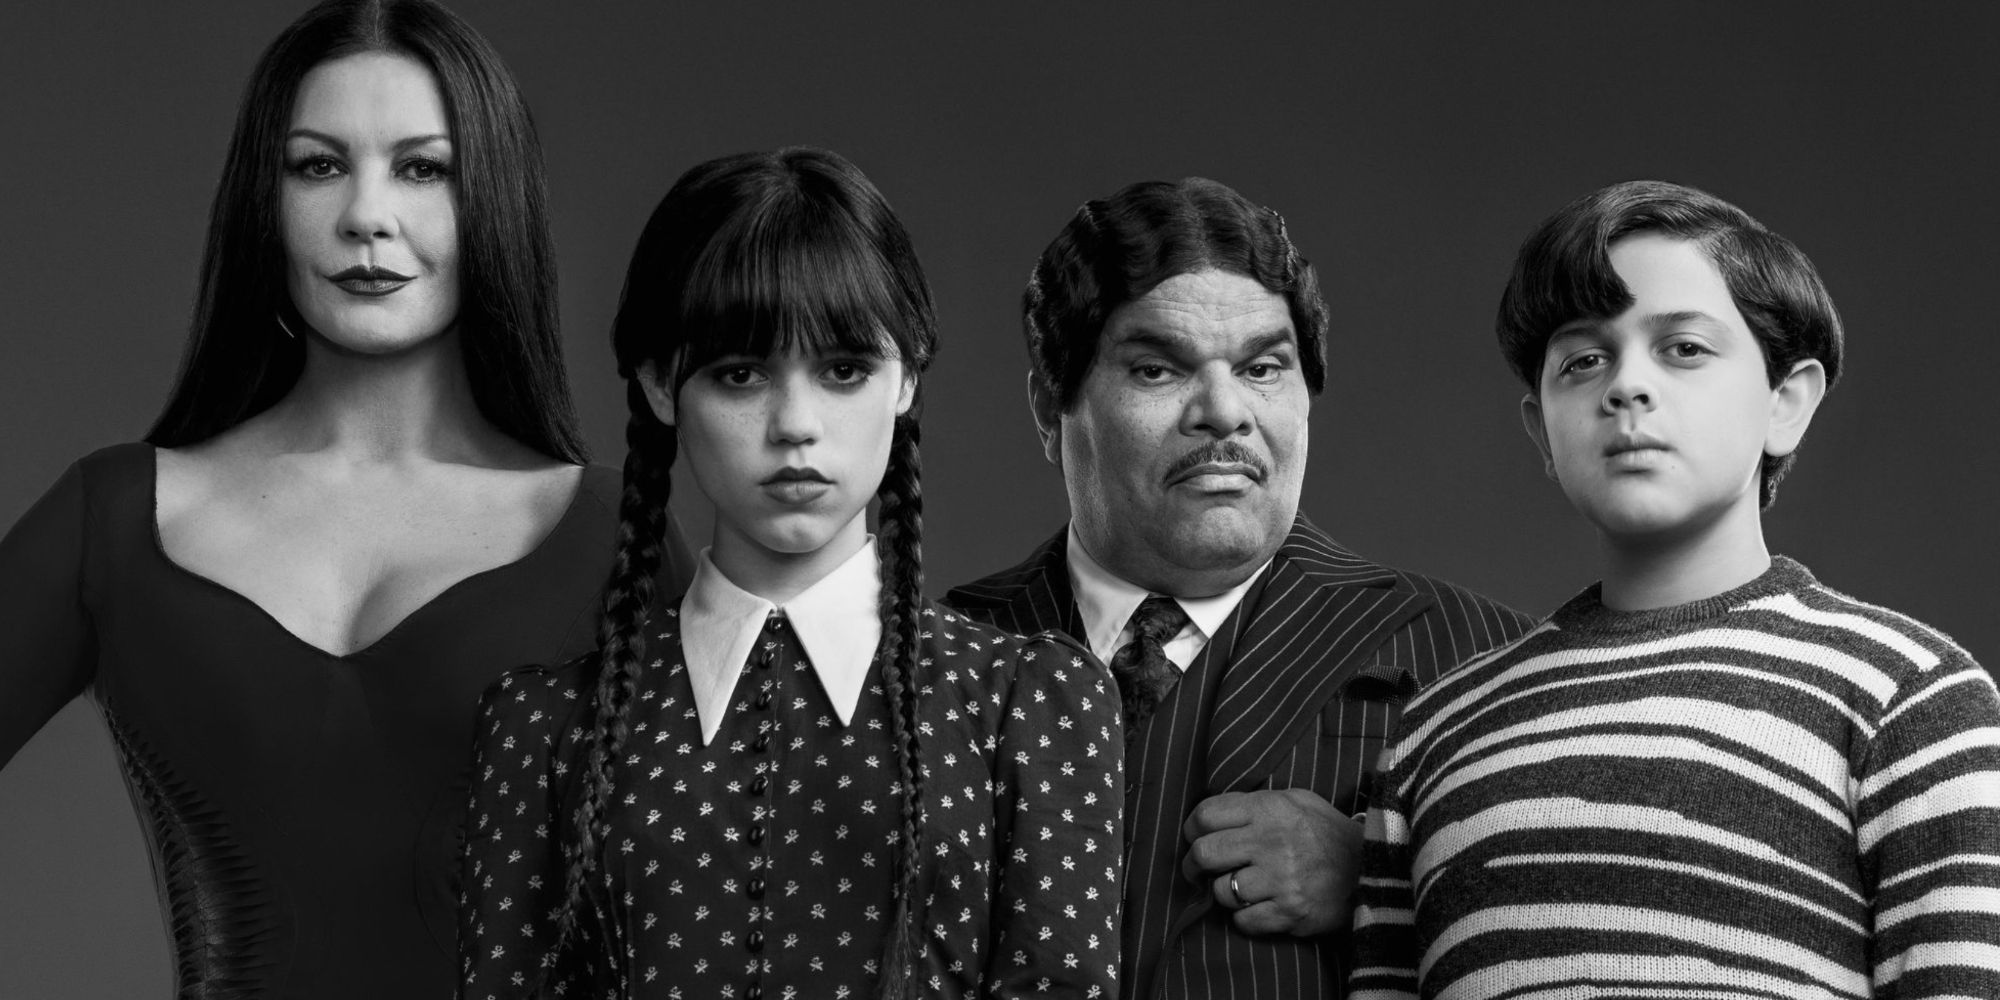 Wednesday' Series: Every 'Addams Family' Film Easter Eggs